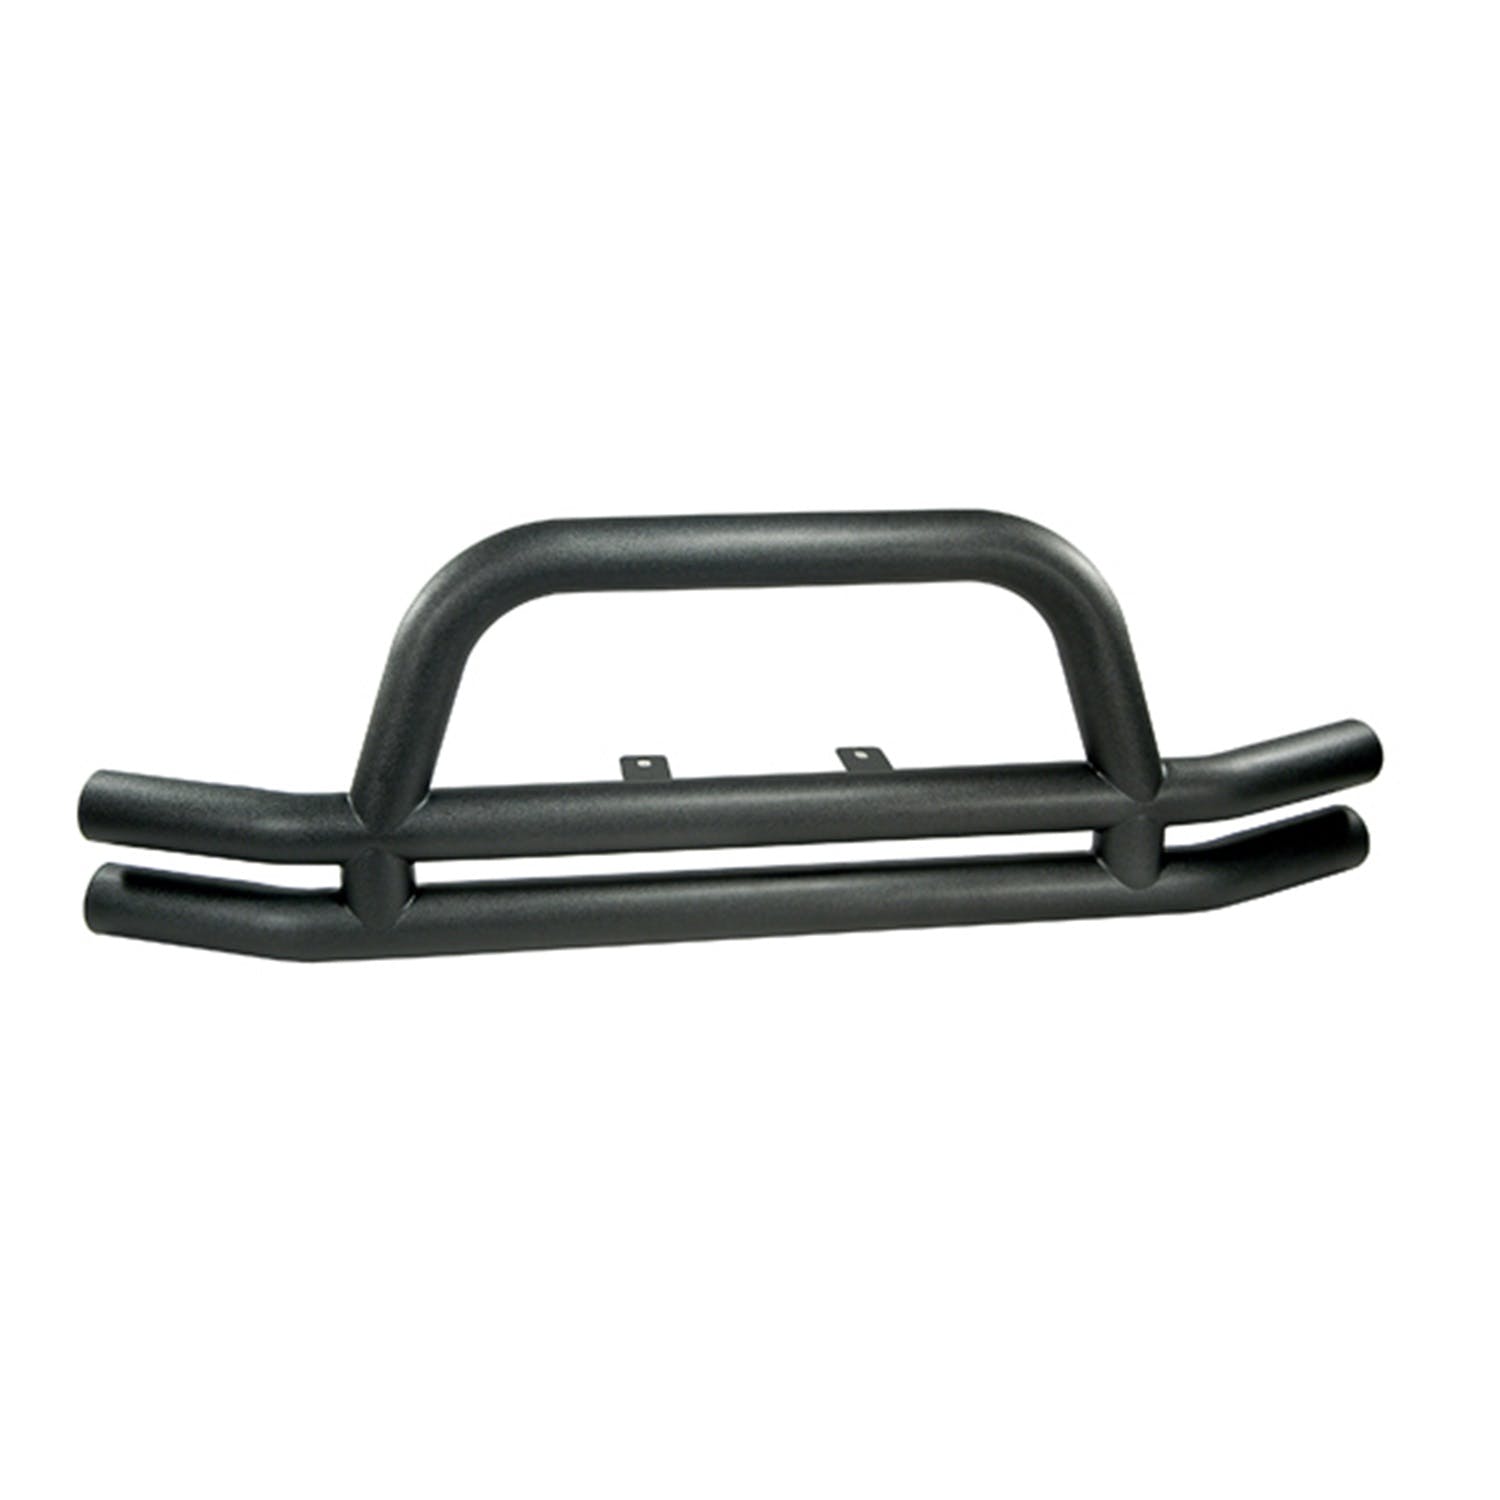 Rugged Ridge 11561.01 Double Tube Front Bumper, 3in